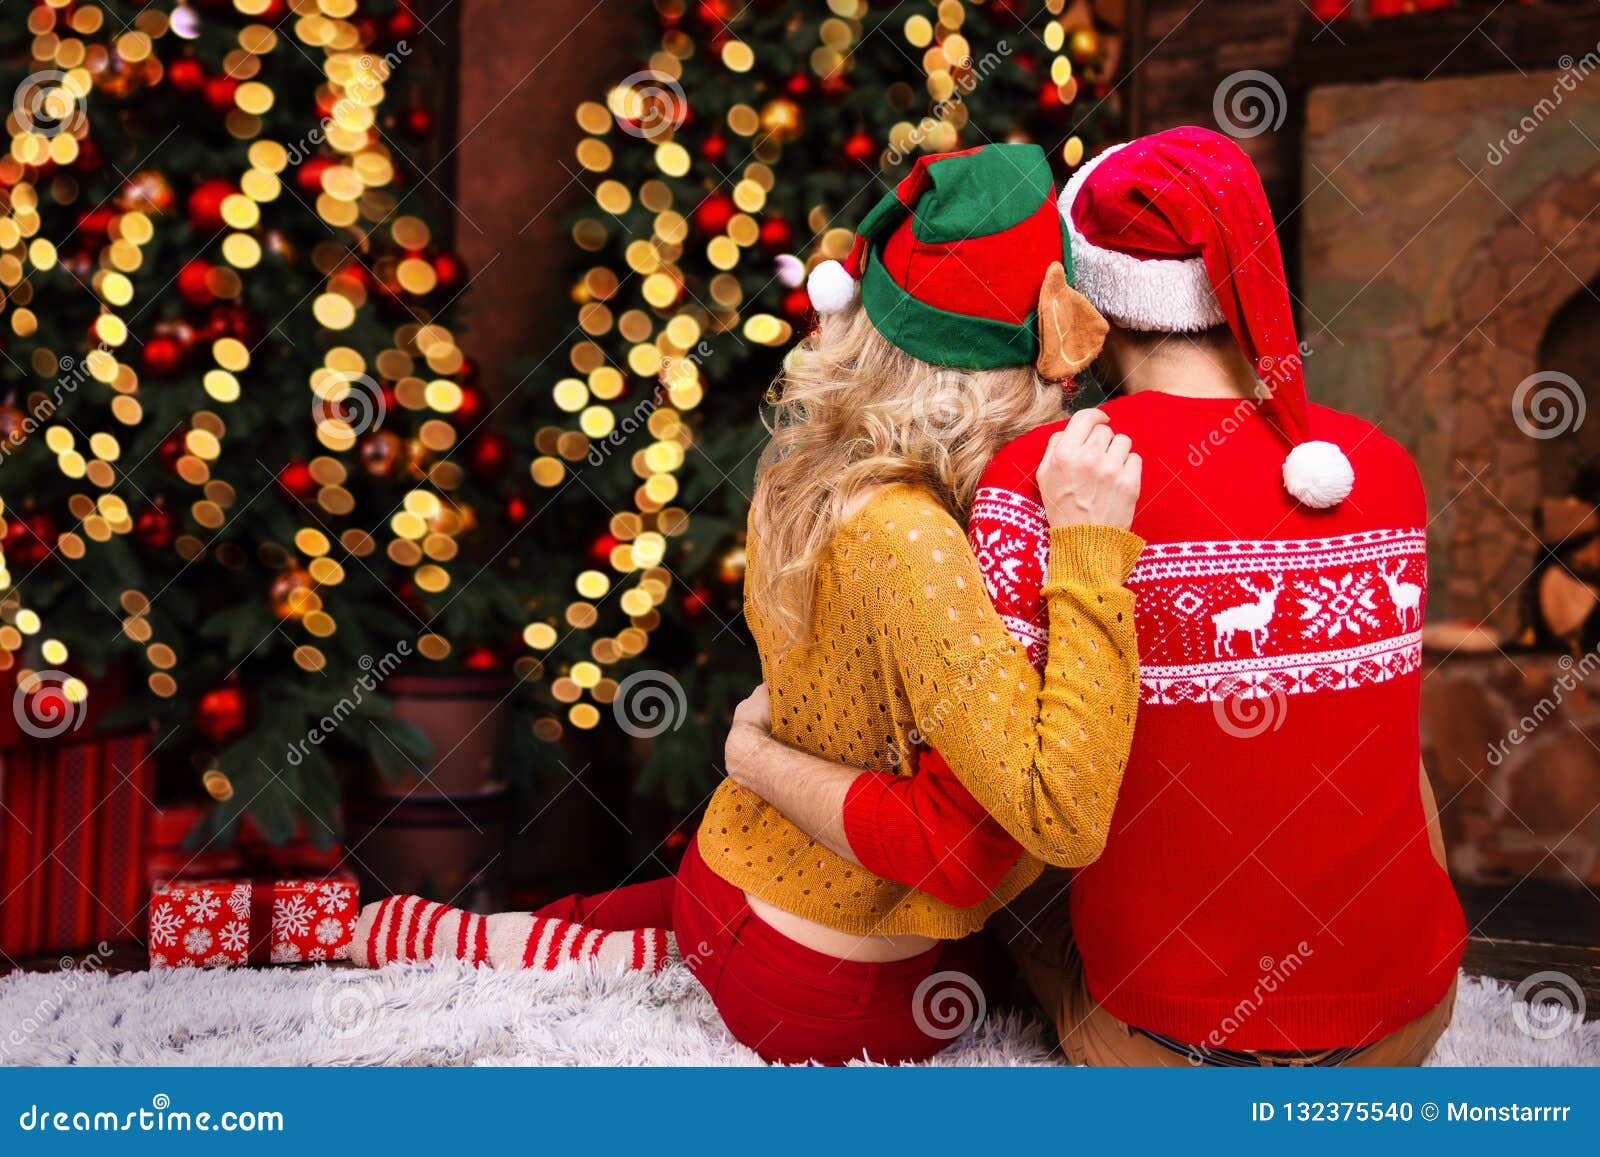 Young Happy Couple in Love during Merry Christmas and Happy New ...